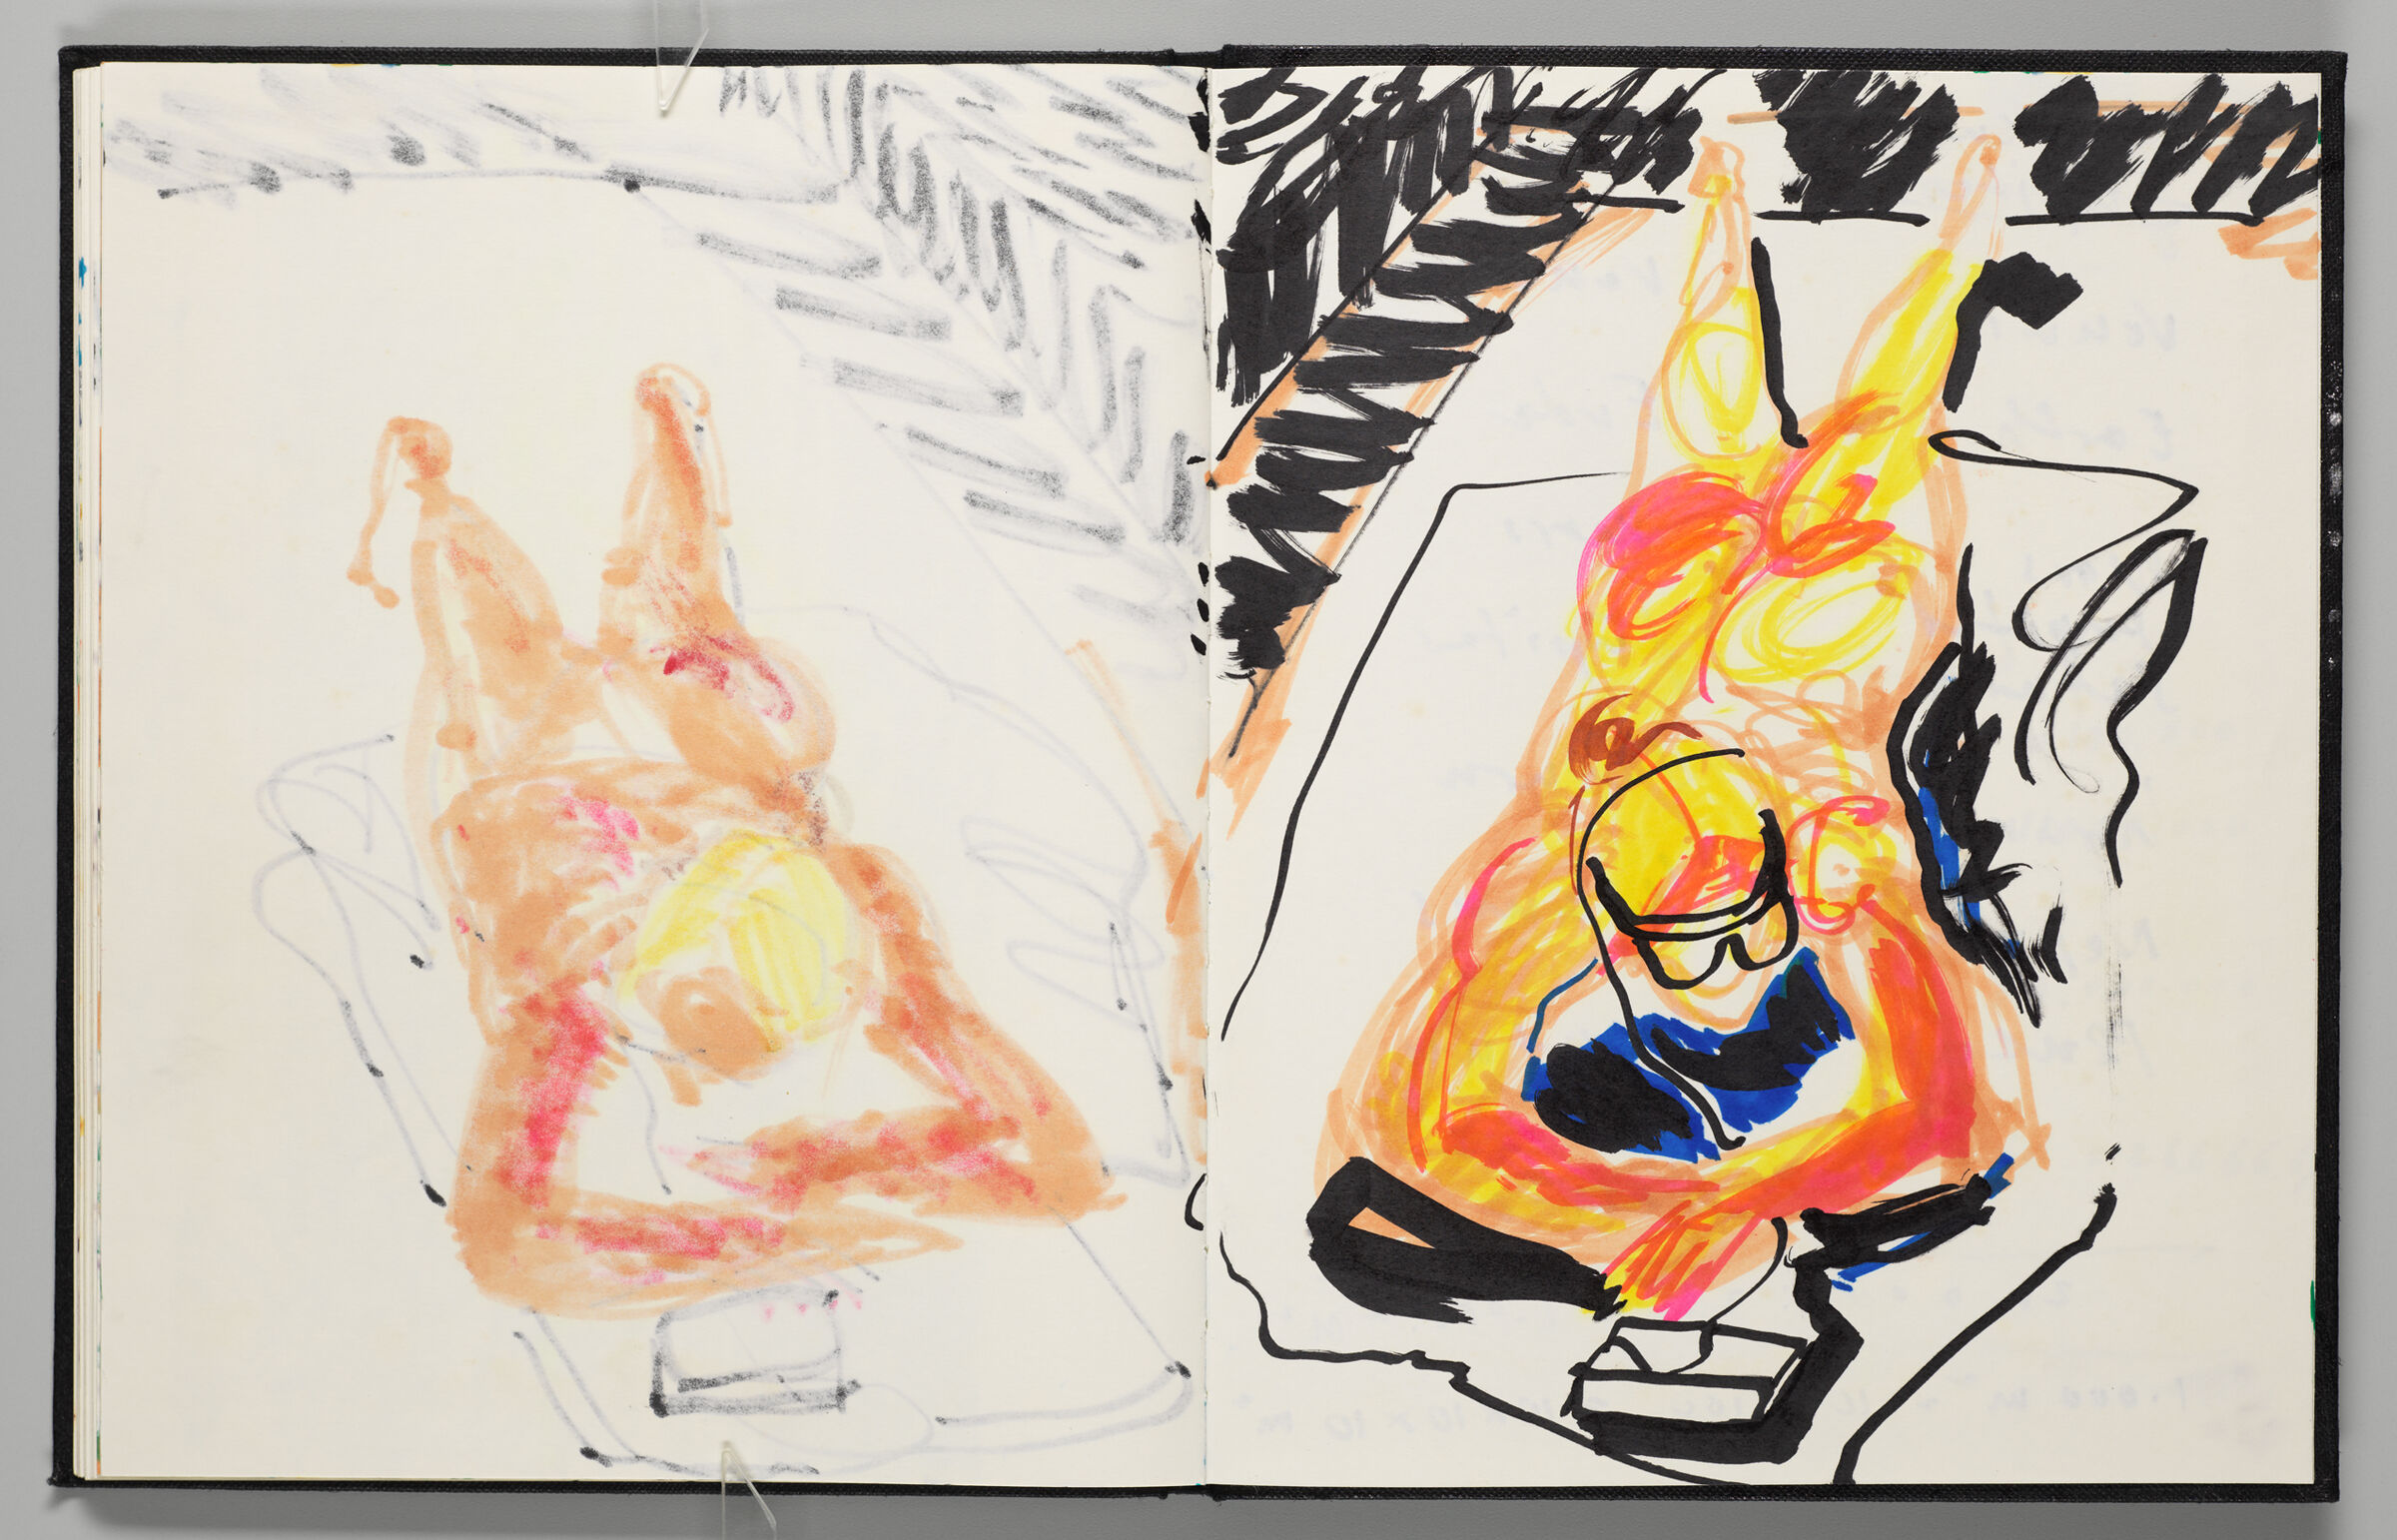 Untitled (Bleed-Through Of Previous Page, Left Page); Untitled (Female Figure [Elizabeth] Sunbathing, Right Page)